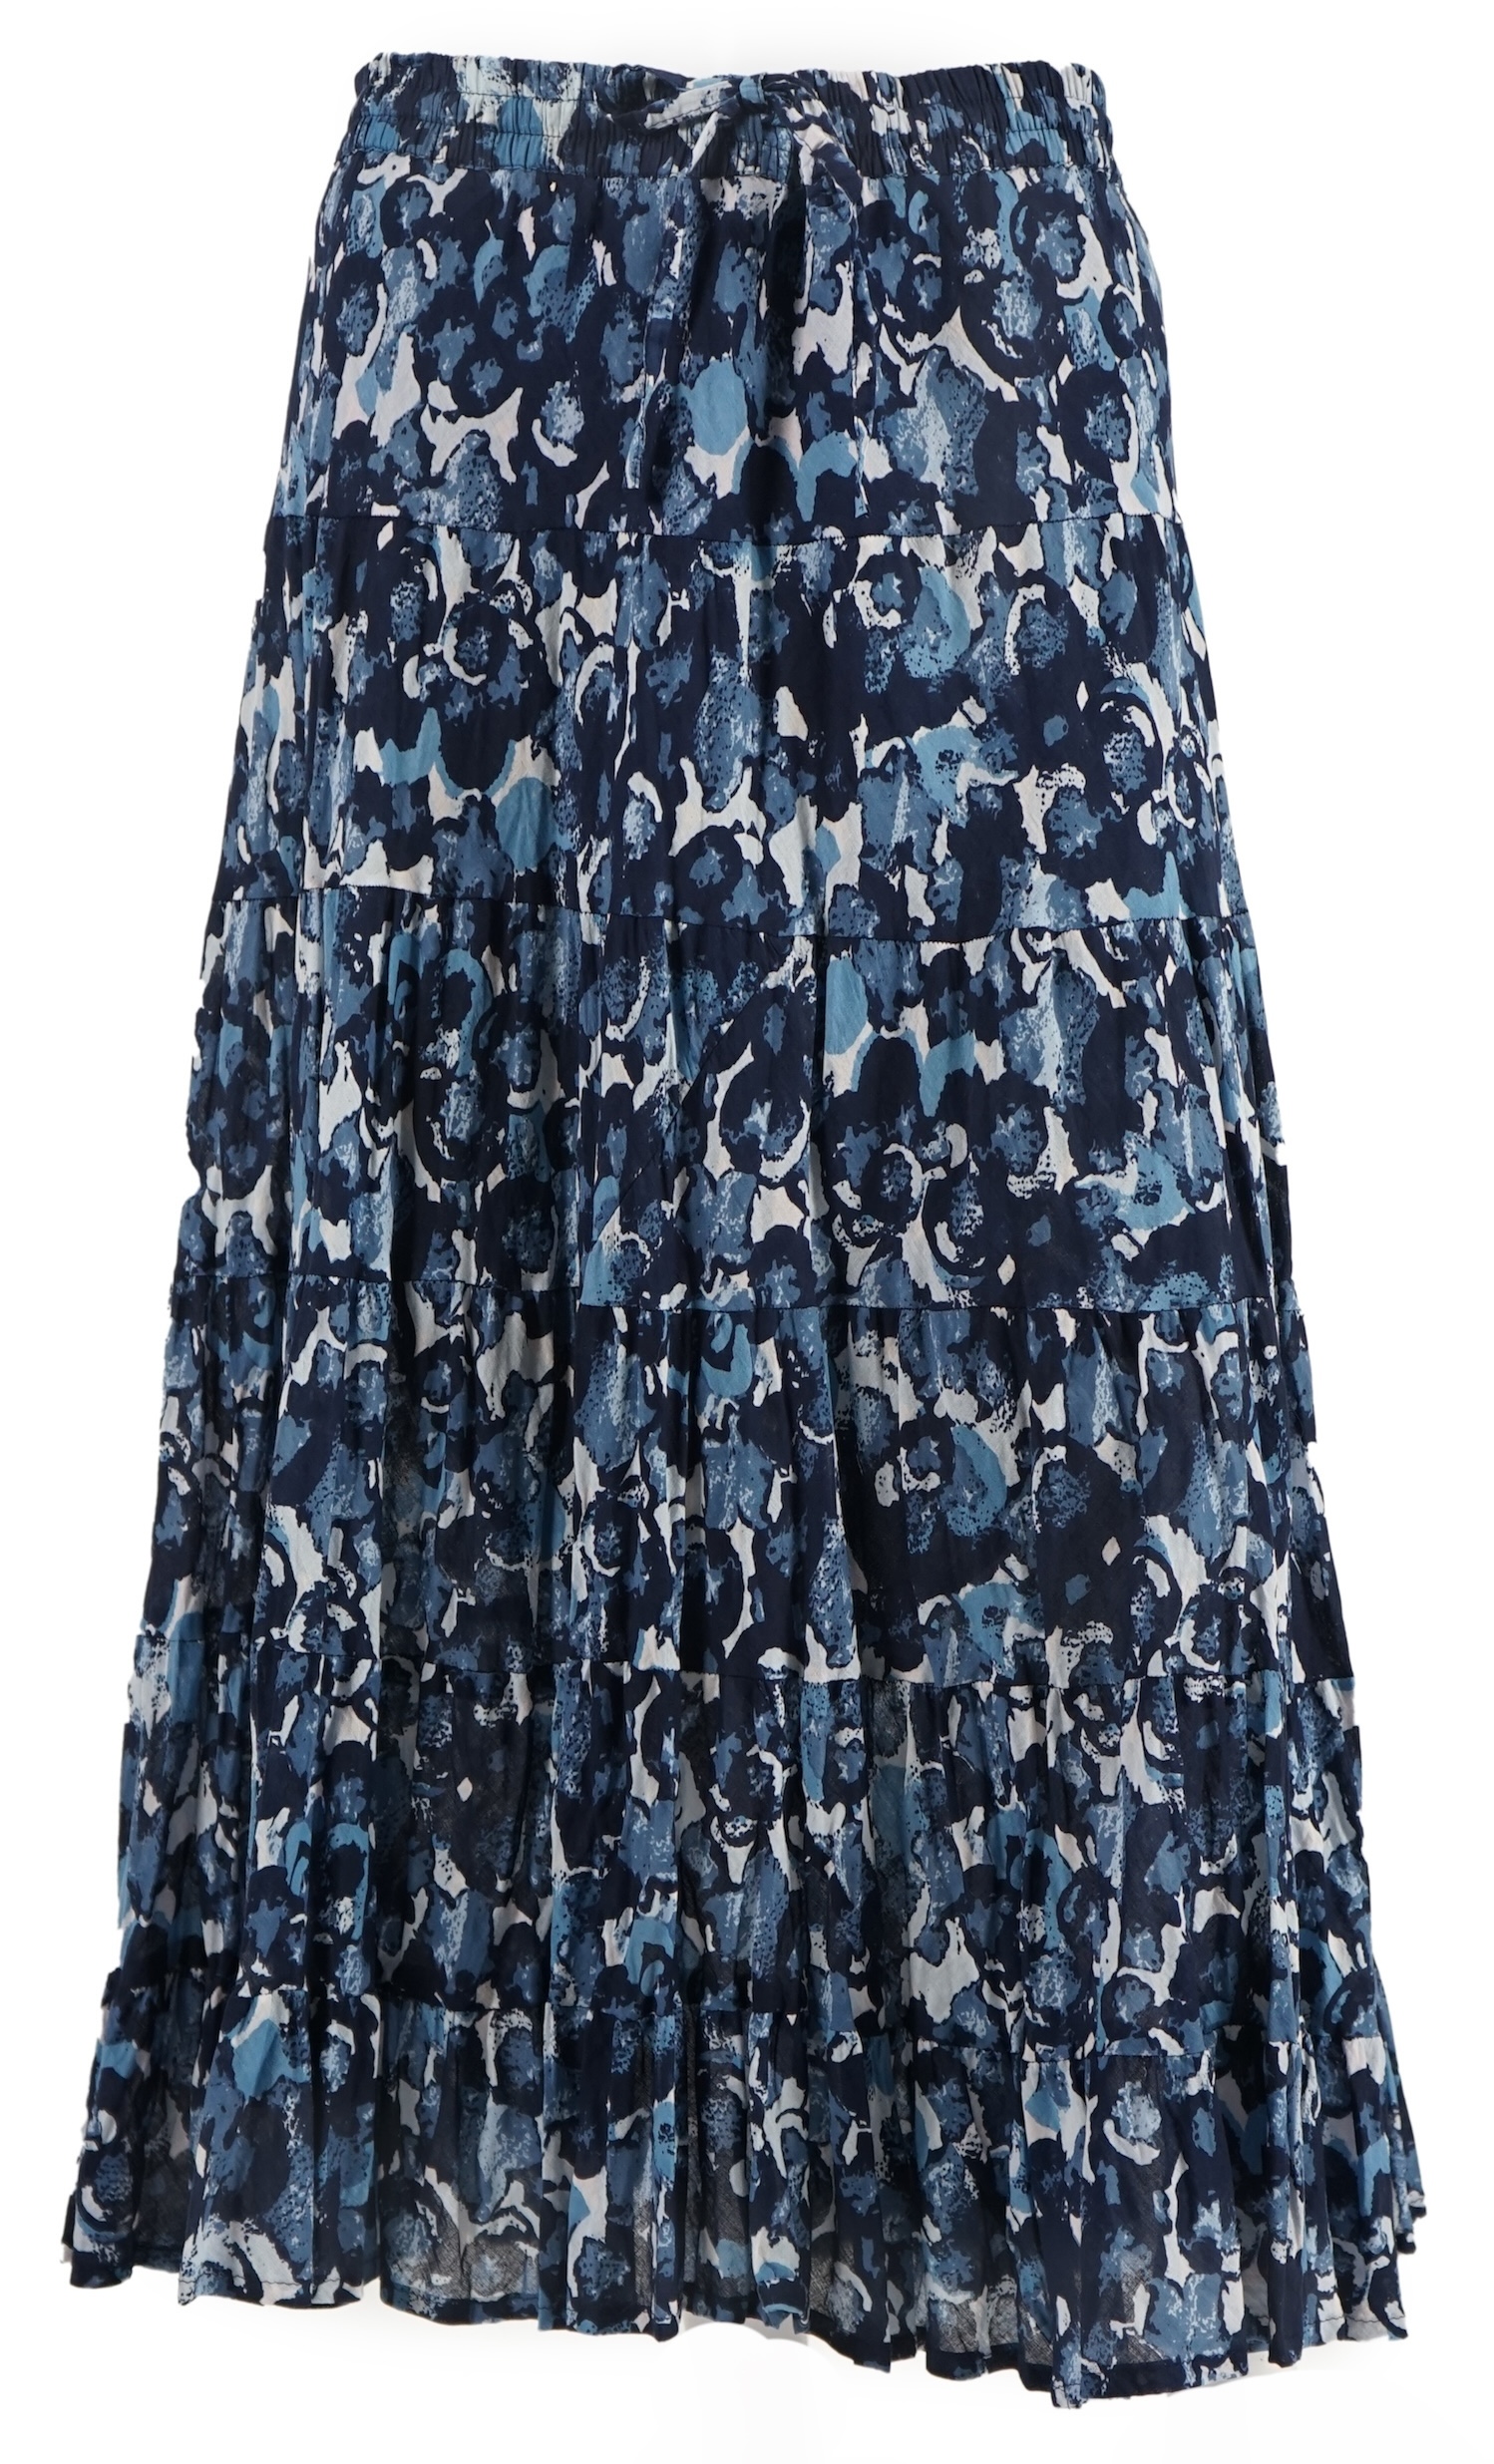 A selection of lady's maxi and midi length skirts, brands include Anne Storey, Calypso, 22 Maggio, Mes Demoiselles Paris, Onjenu, Gerulean Exclusive, Cerulean, Charlotte Sparre and Nicole Farhi, Mostly elasticated waists